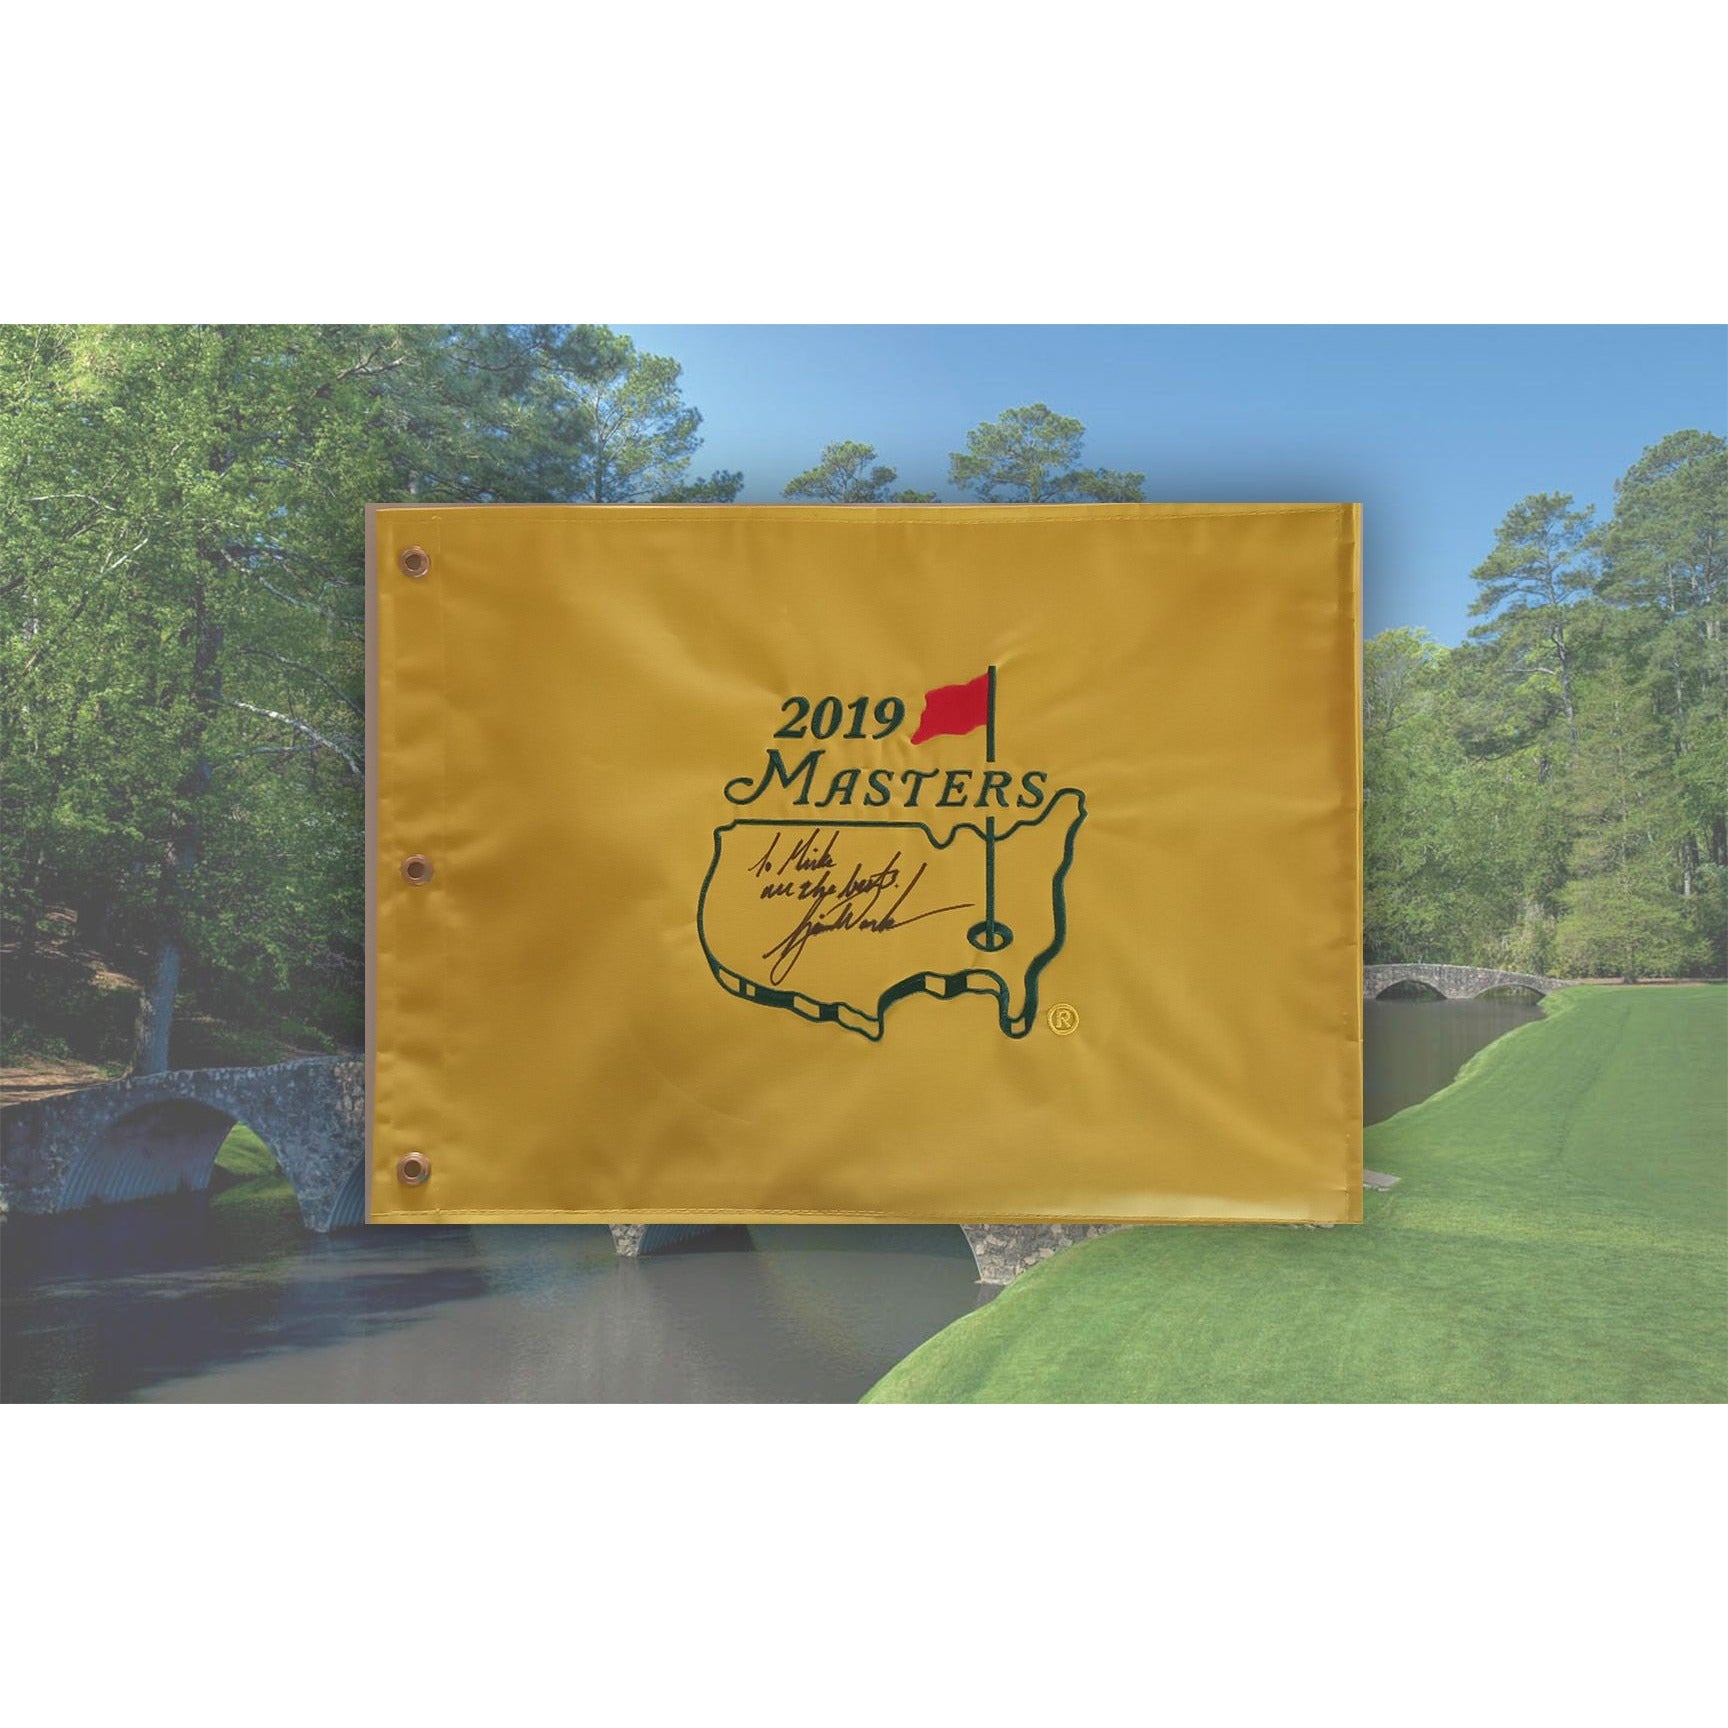 Tiger Woods "To Mike all the best" 2019 Masters Golf pin flag signed with proof